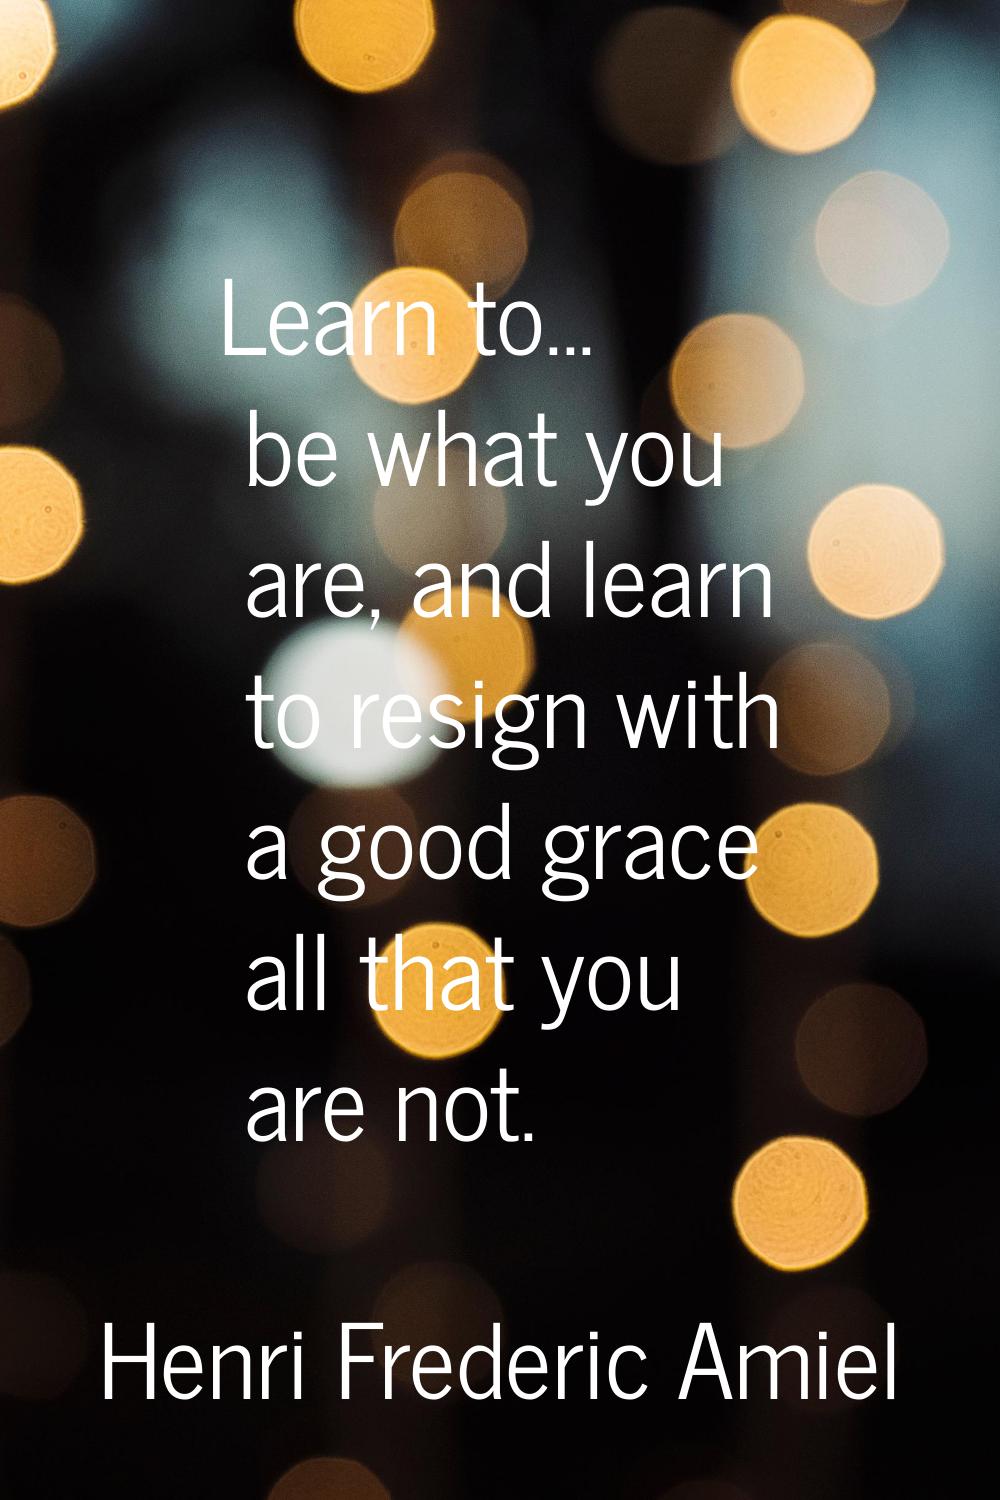 Learn to... be what you are, and learn to resign with a good grace all that you are not.